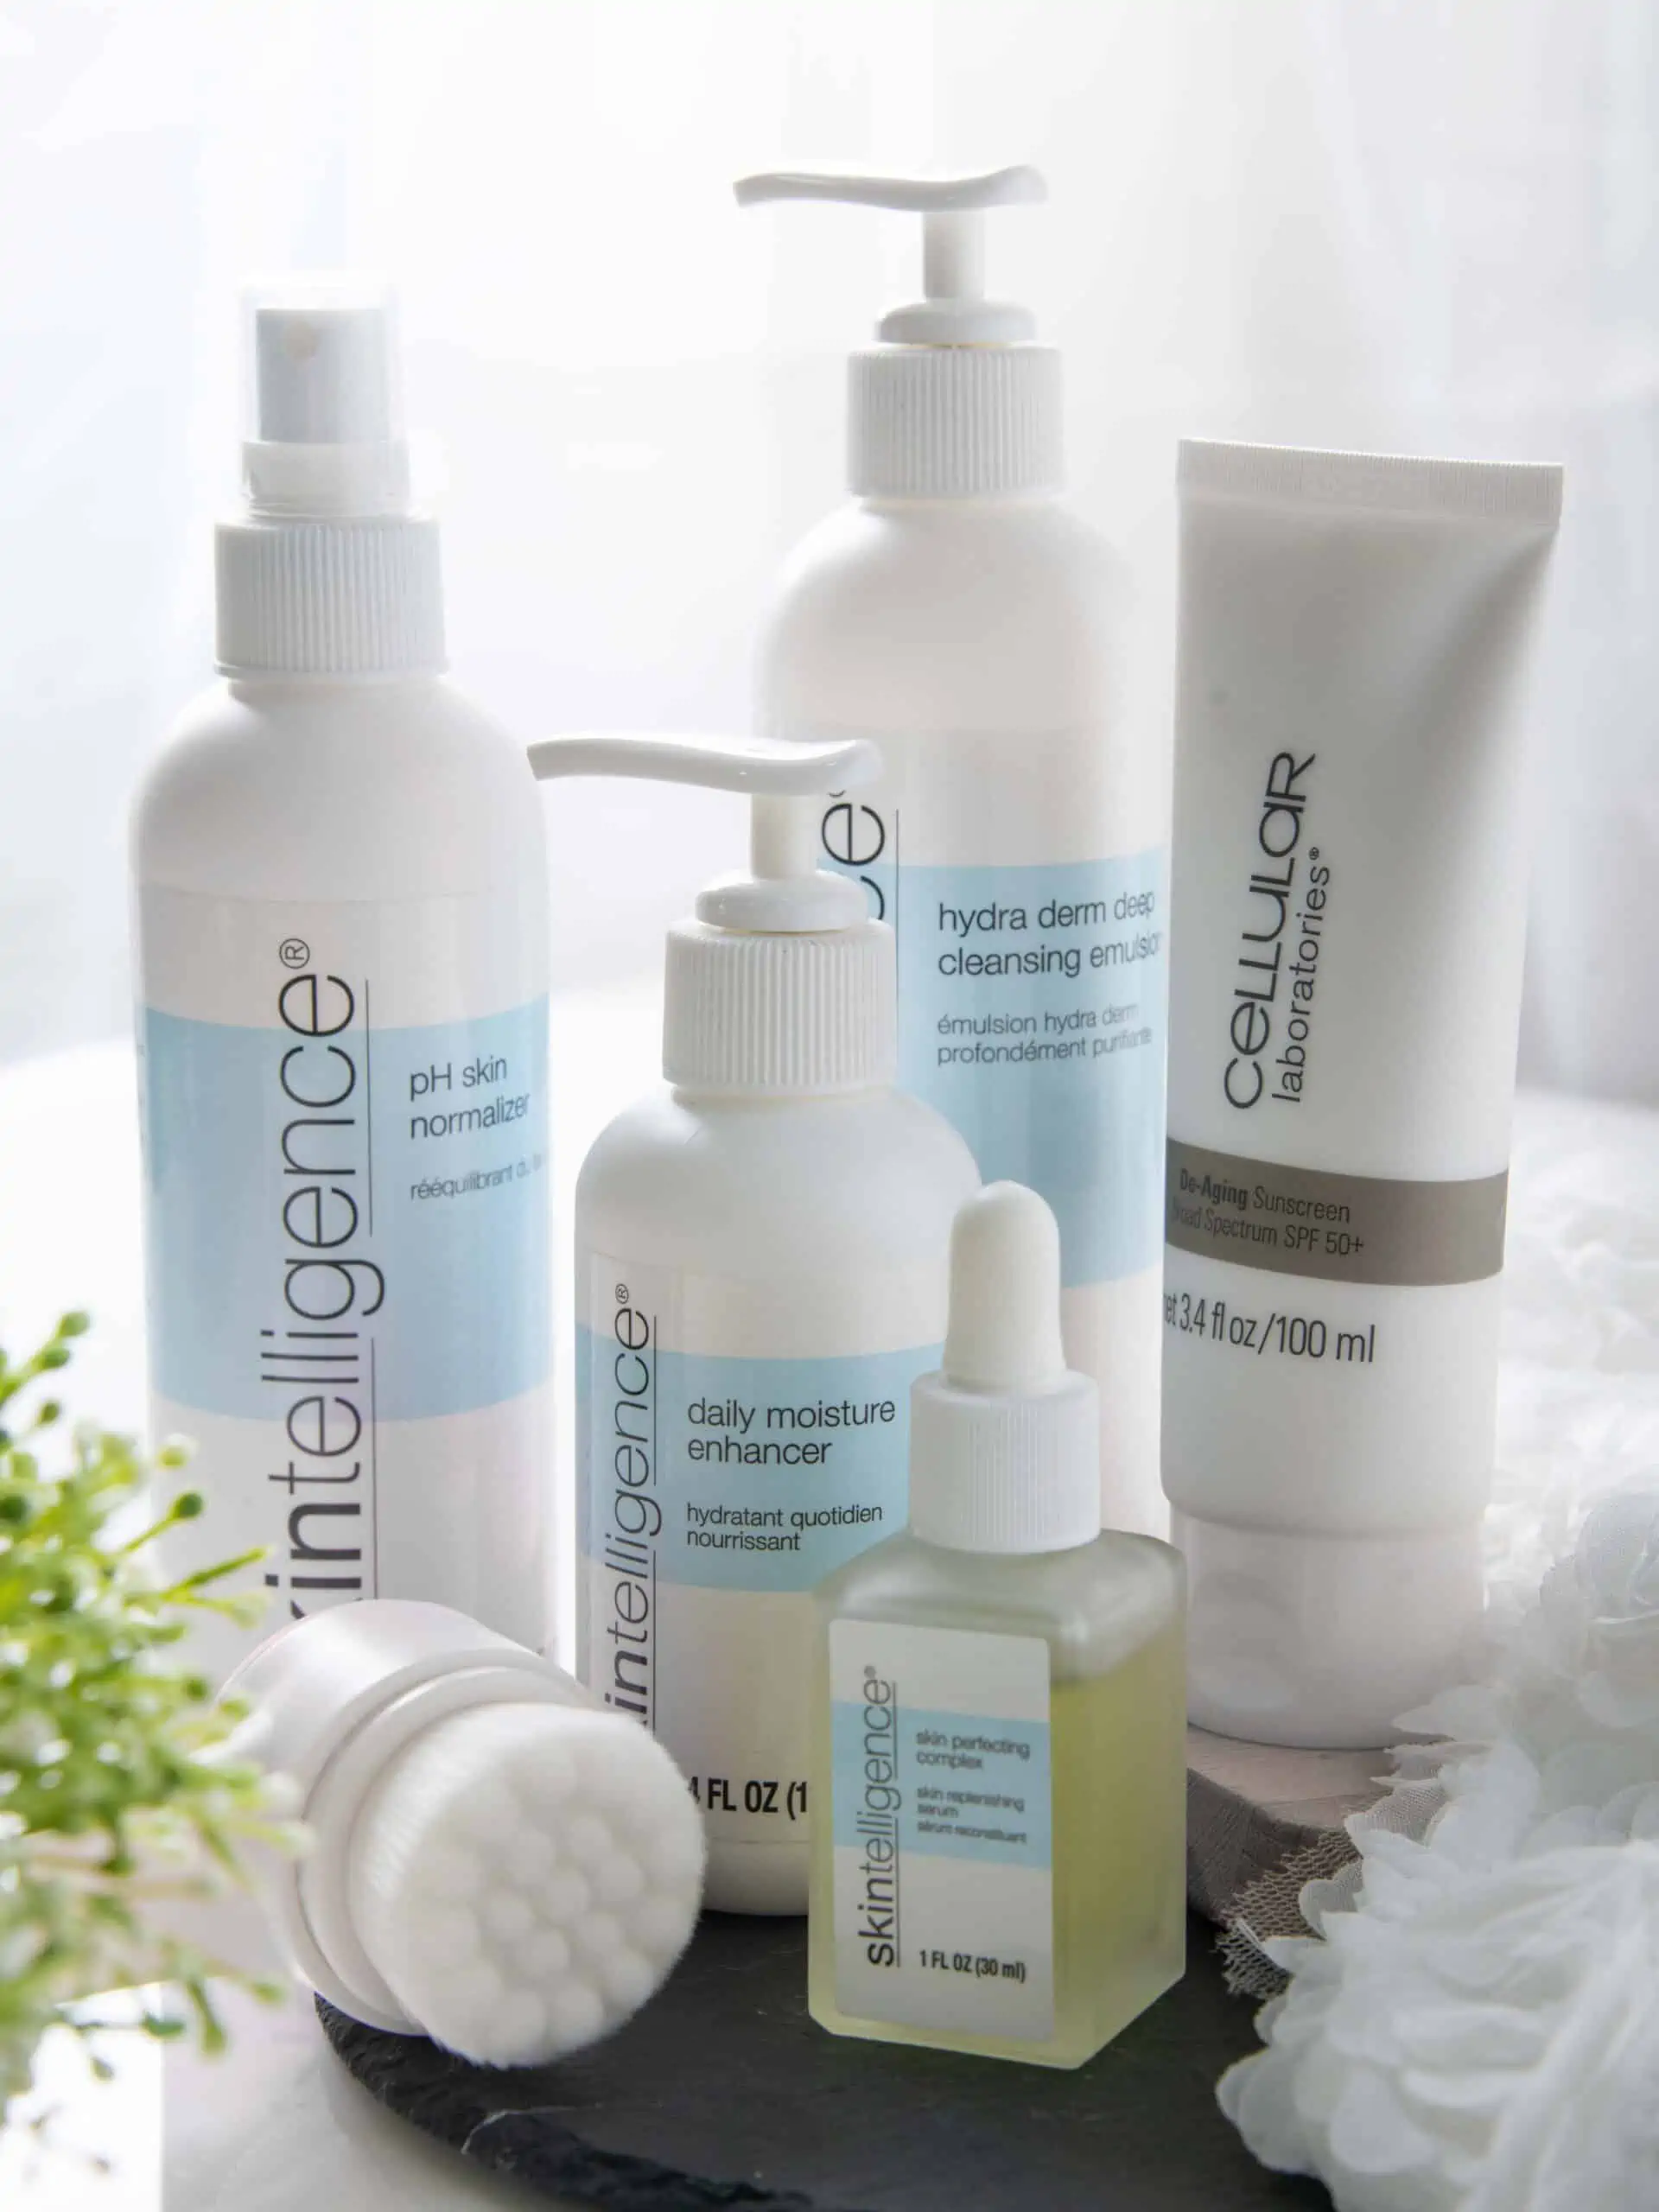 skin care product photography